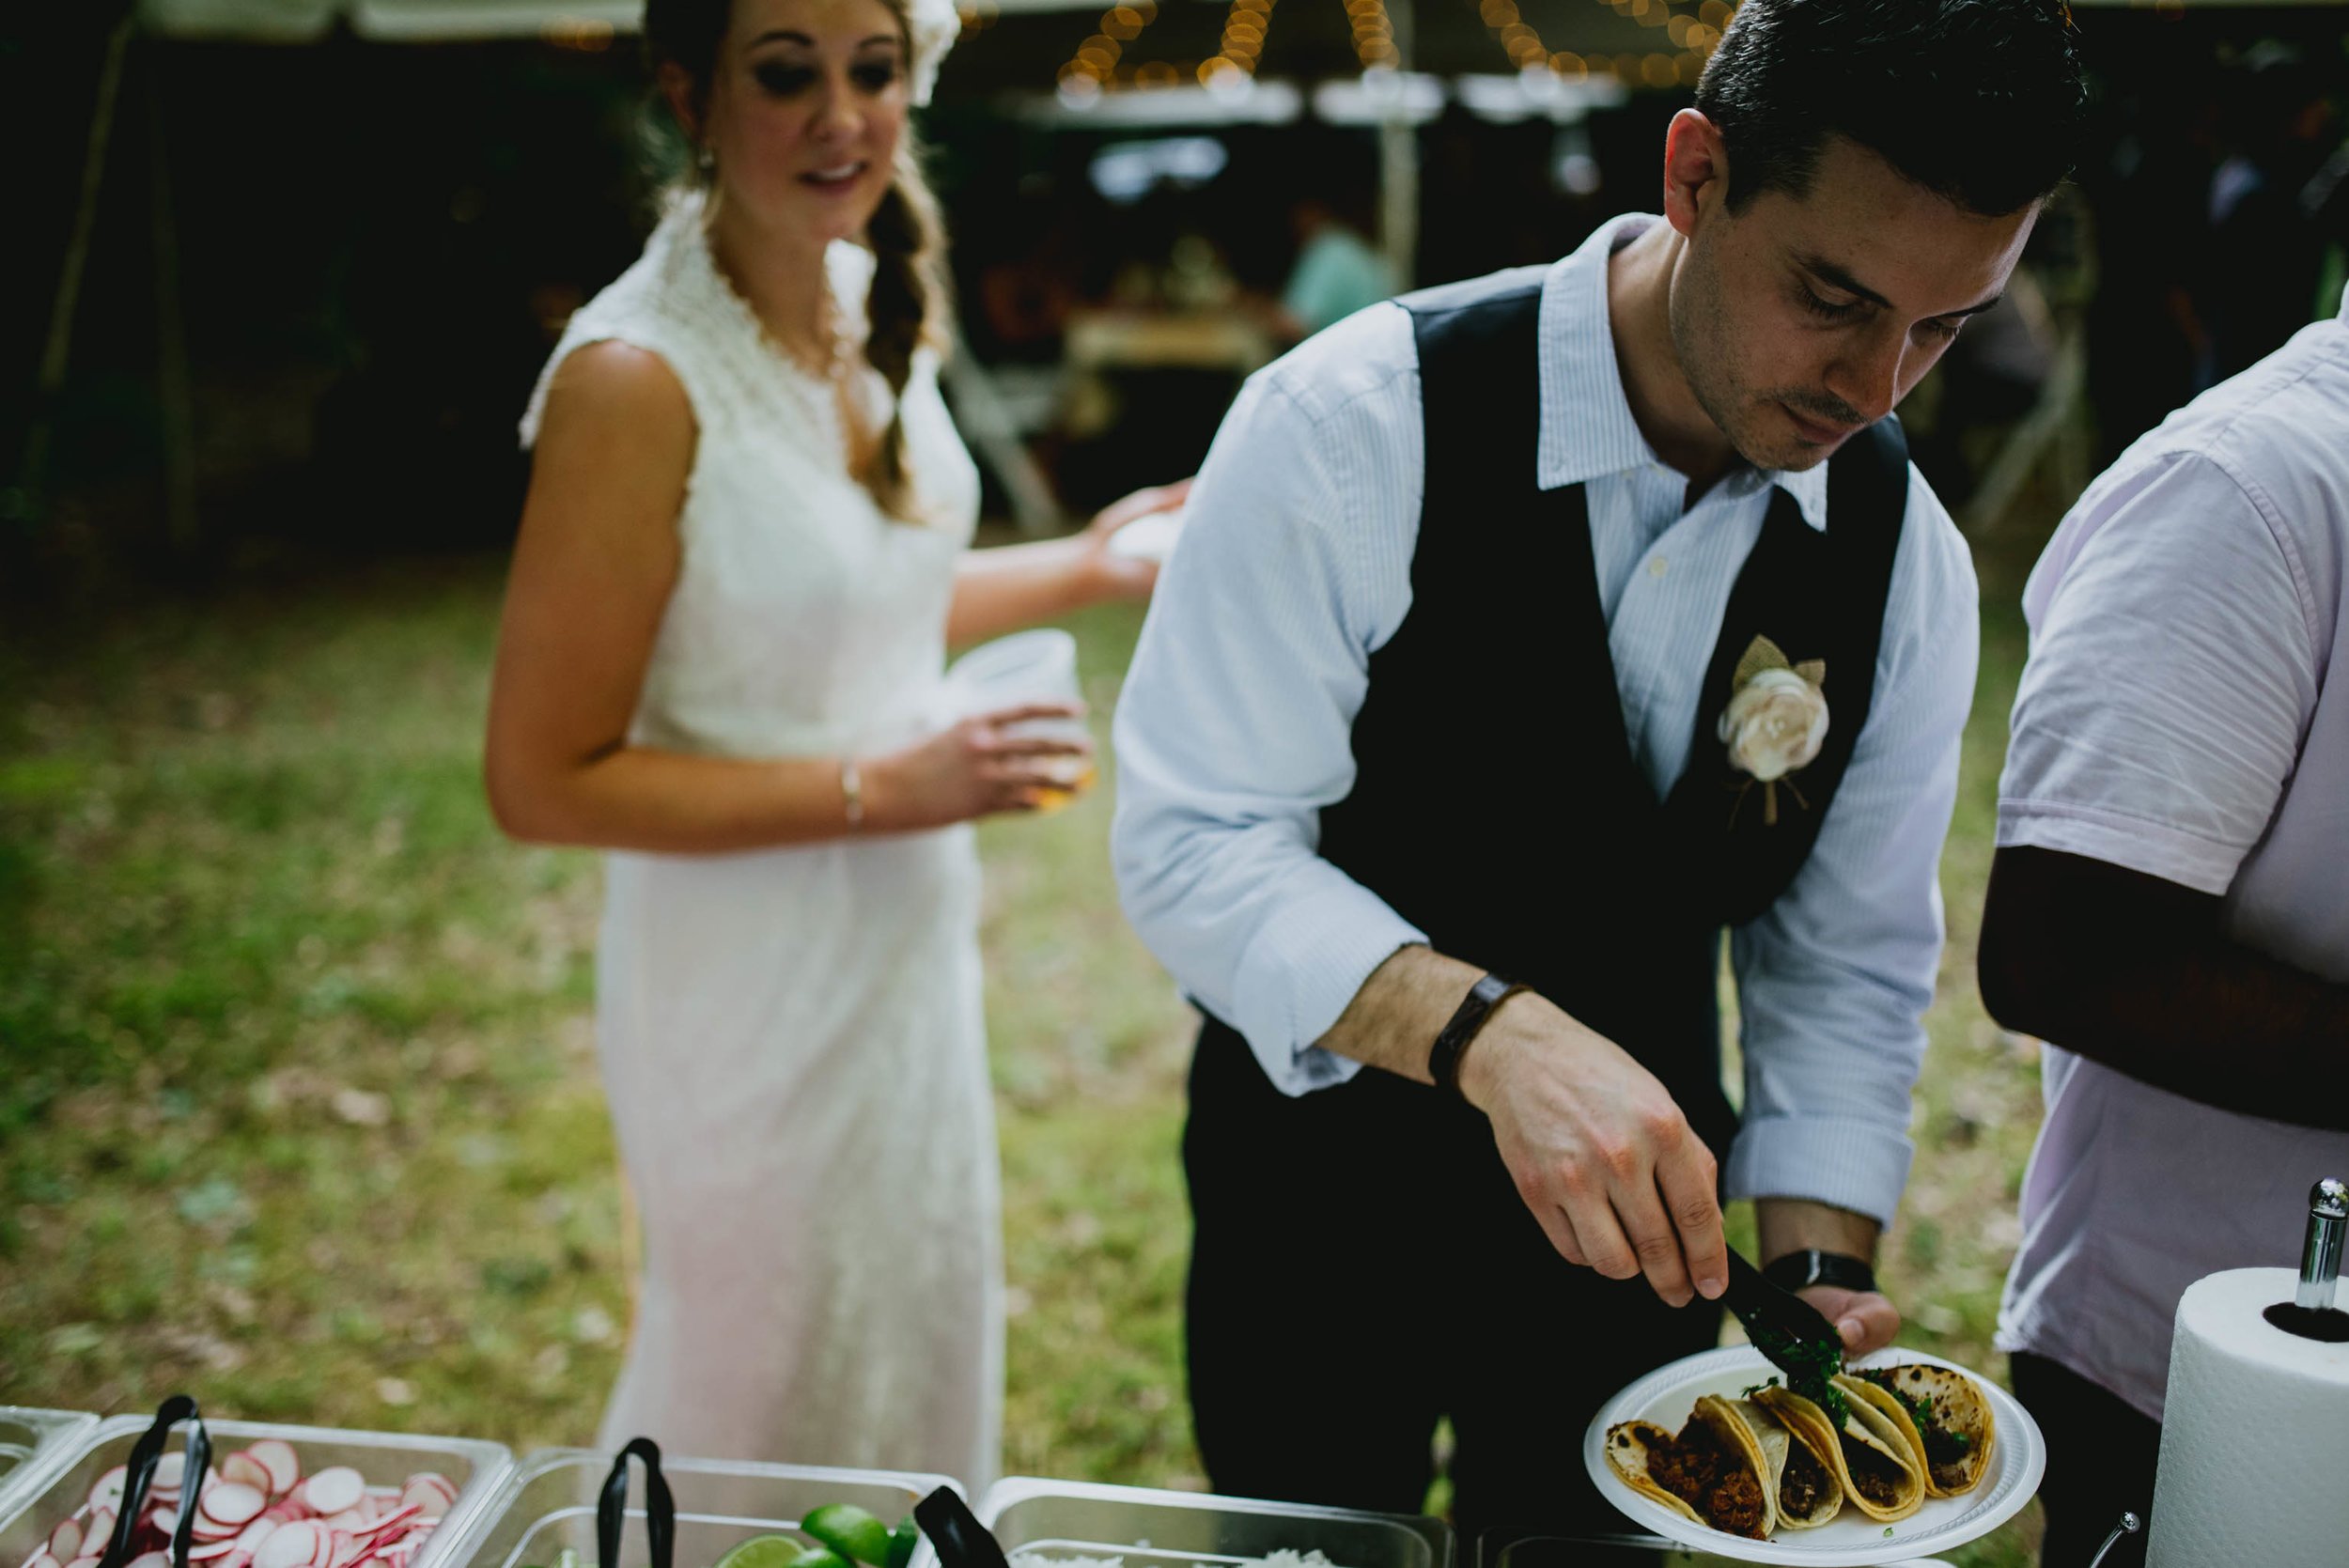 bride and groom getting their taco plates during their wedding reception